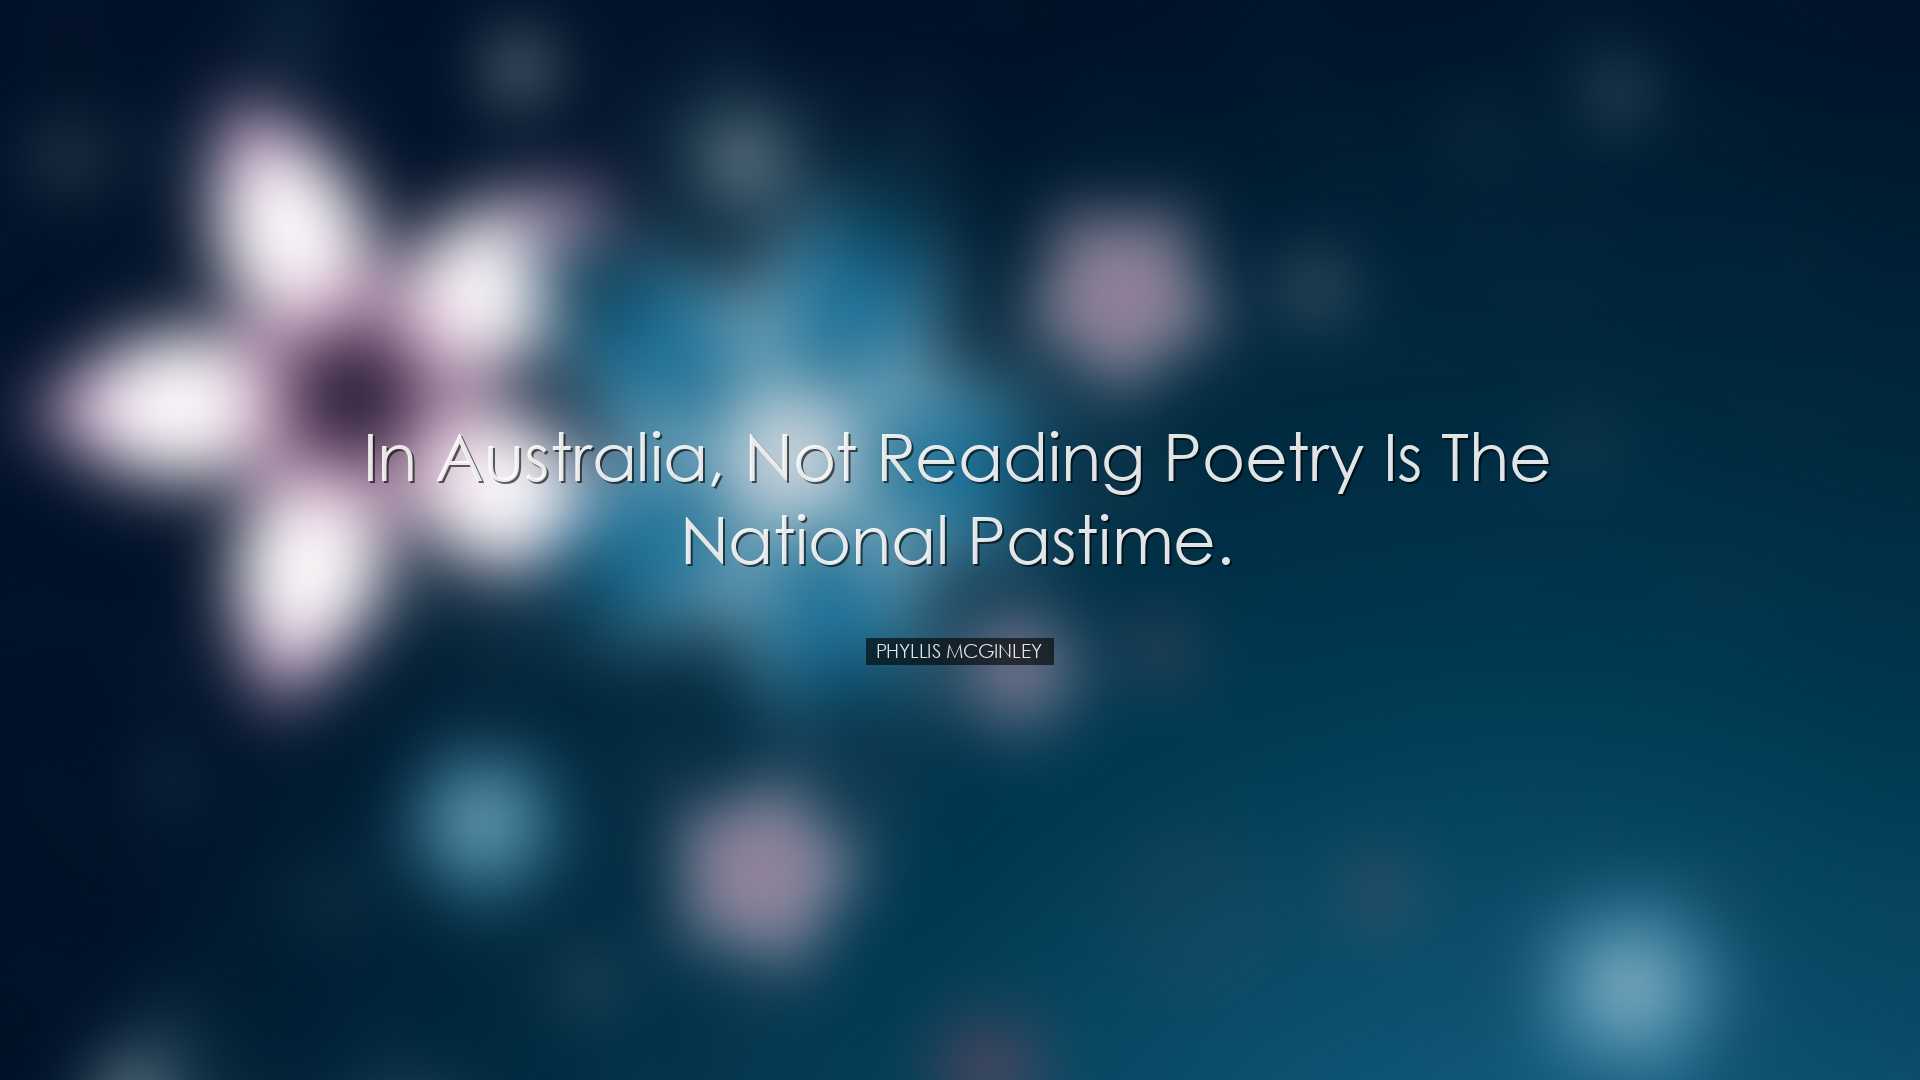 In Australia, not reading poetry is the national pastime. - Phylli